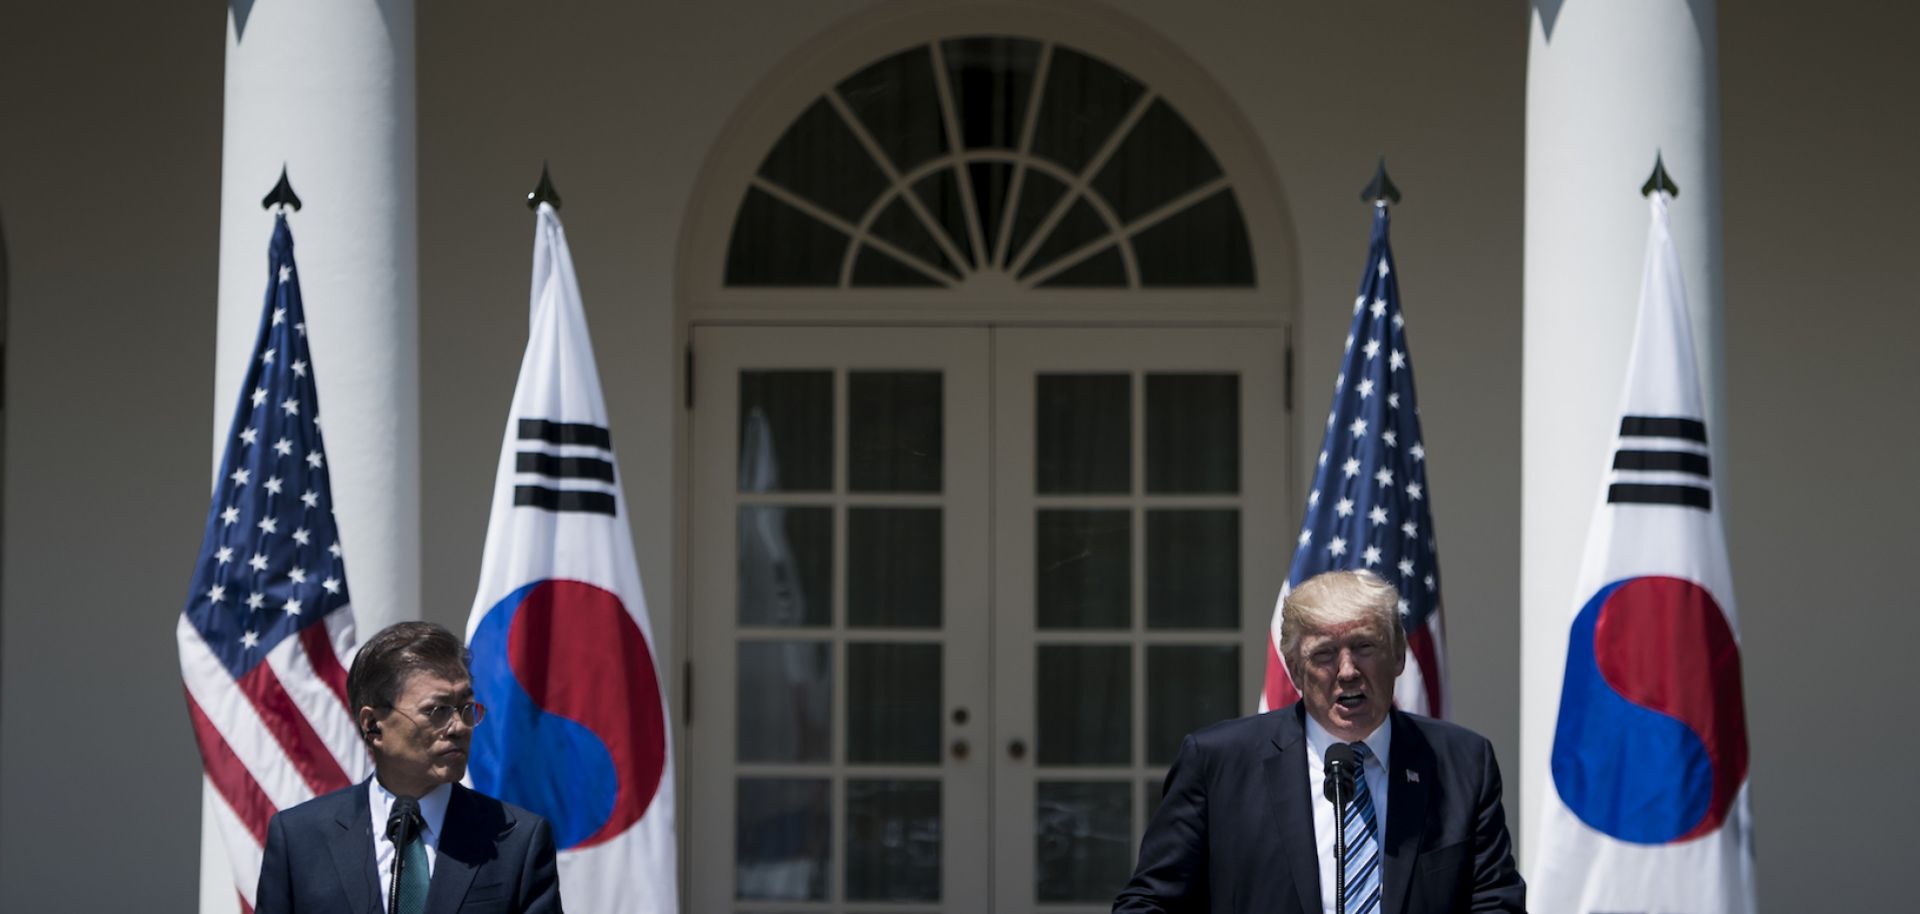 South Korean President Moon Jae In and U.S. President Donald Trump hold a news conference outside the White House on June 30, 2017.